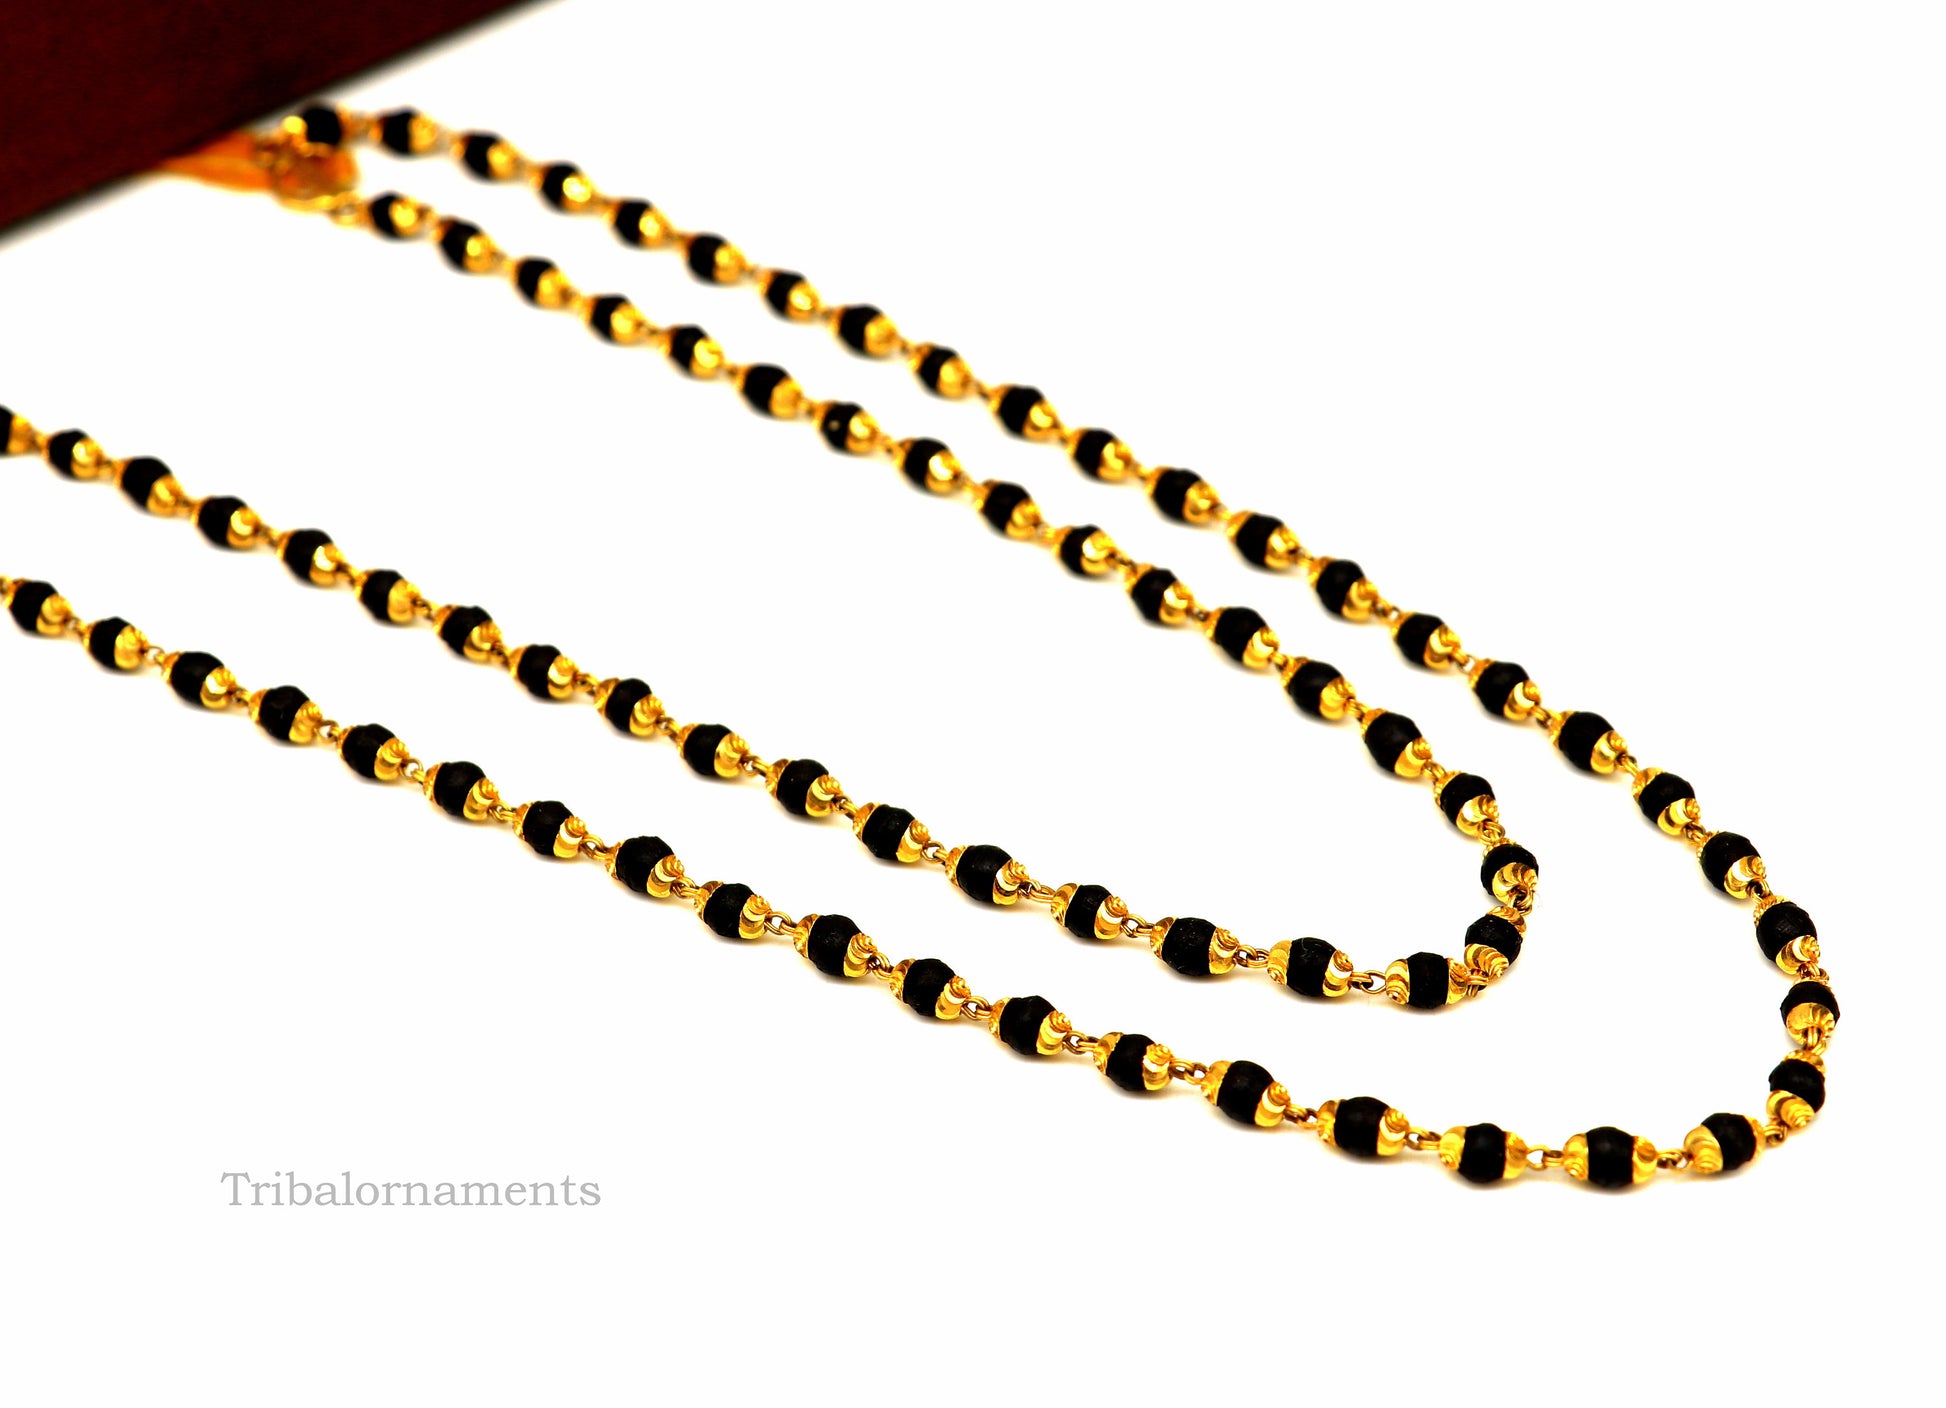 22kt yellow gold hallmarked 4mm Black basil rosary chain necklace, Gorgeous customized beaded chain, excellent wedding gifting jewelry ch263 - TRIBAL ORNAMENTS